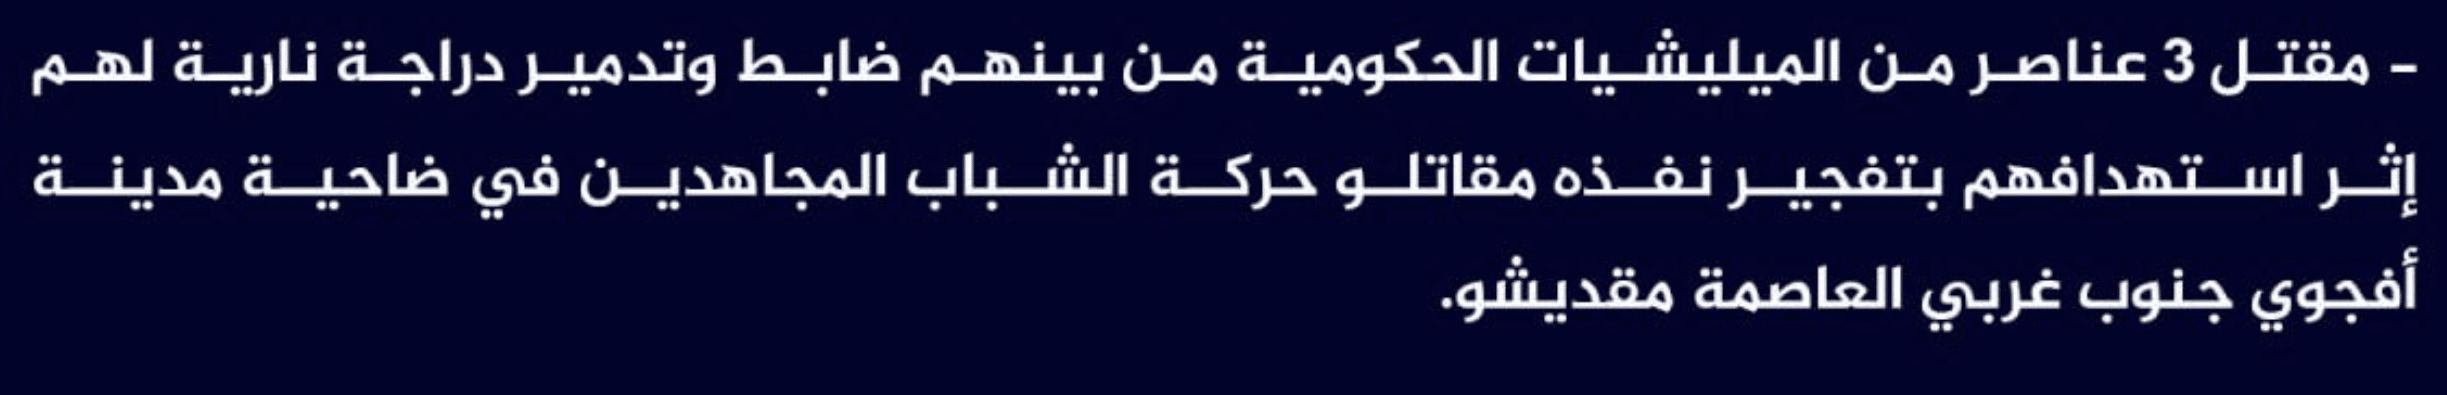 (Claim) al-Shabaab Killed Three Somalian Forces, Including an Officer, and Destroyed a Motorcycle in an IED Attack in Afgoyee City, Southwestern Mogadishu, Somalia - 12 February 2023